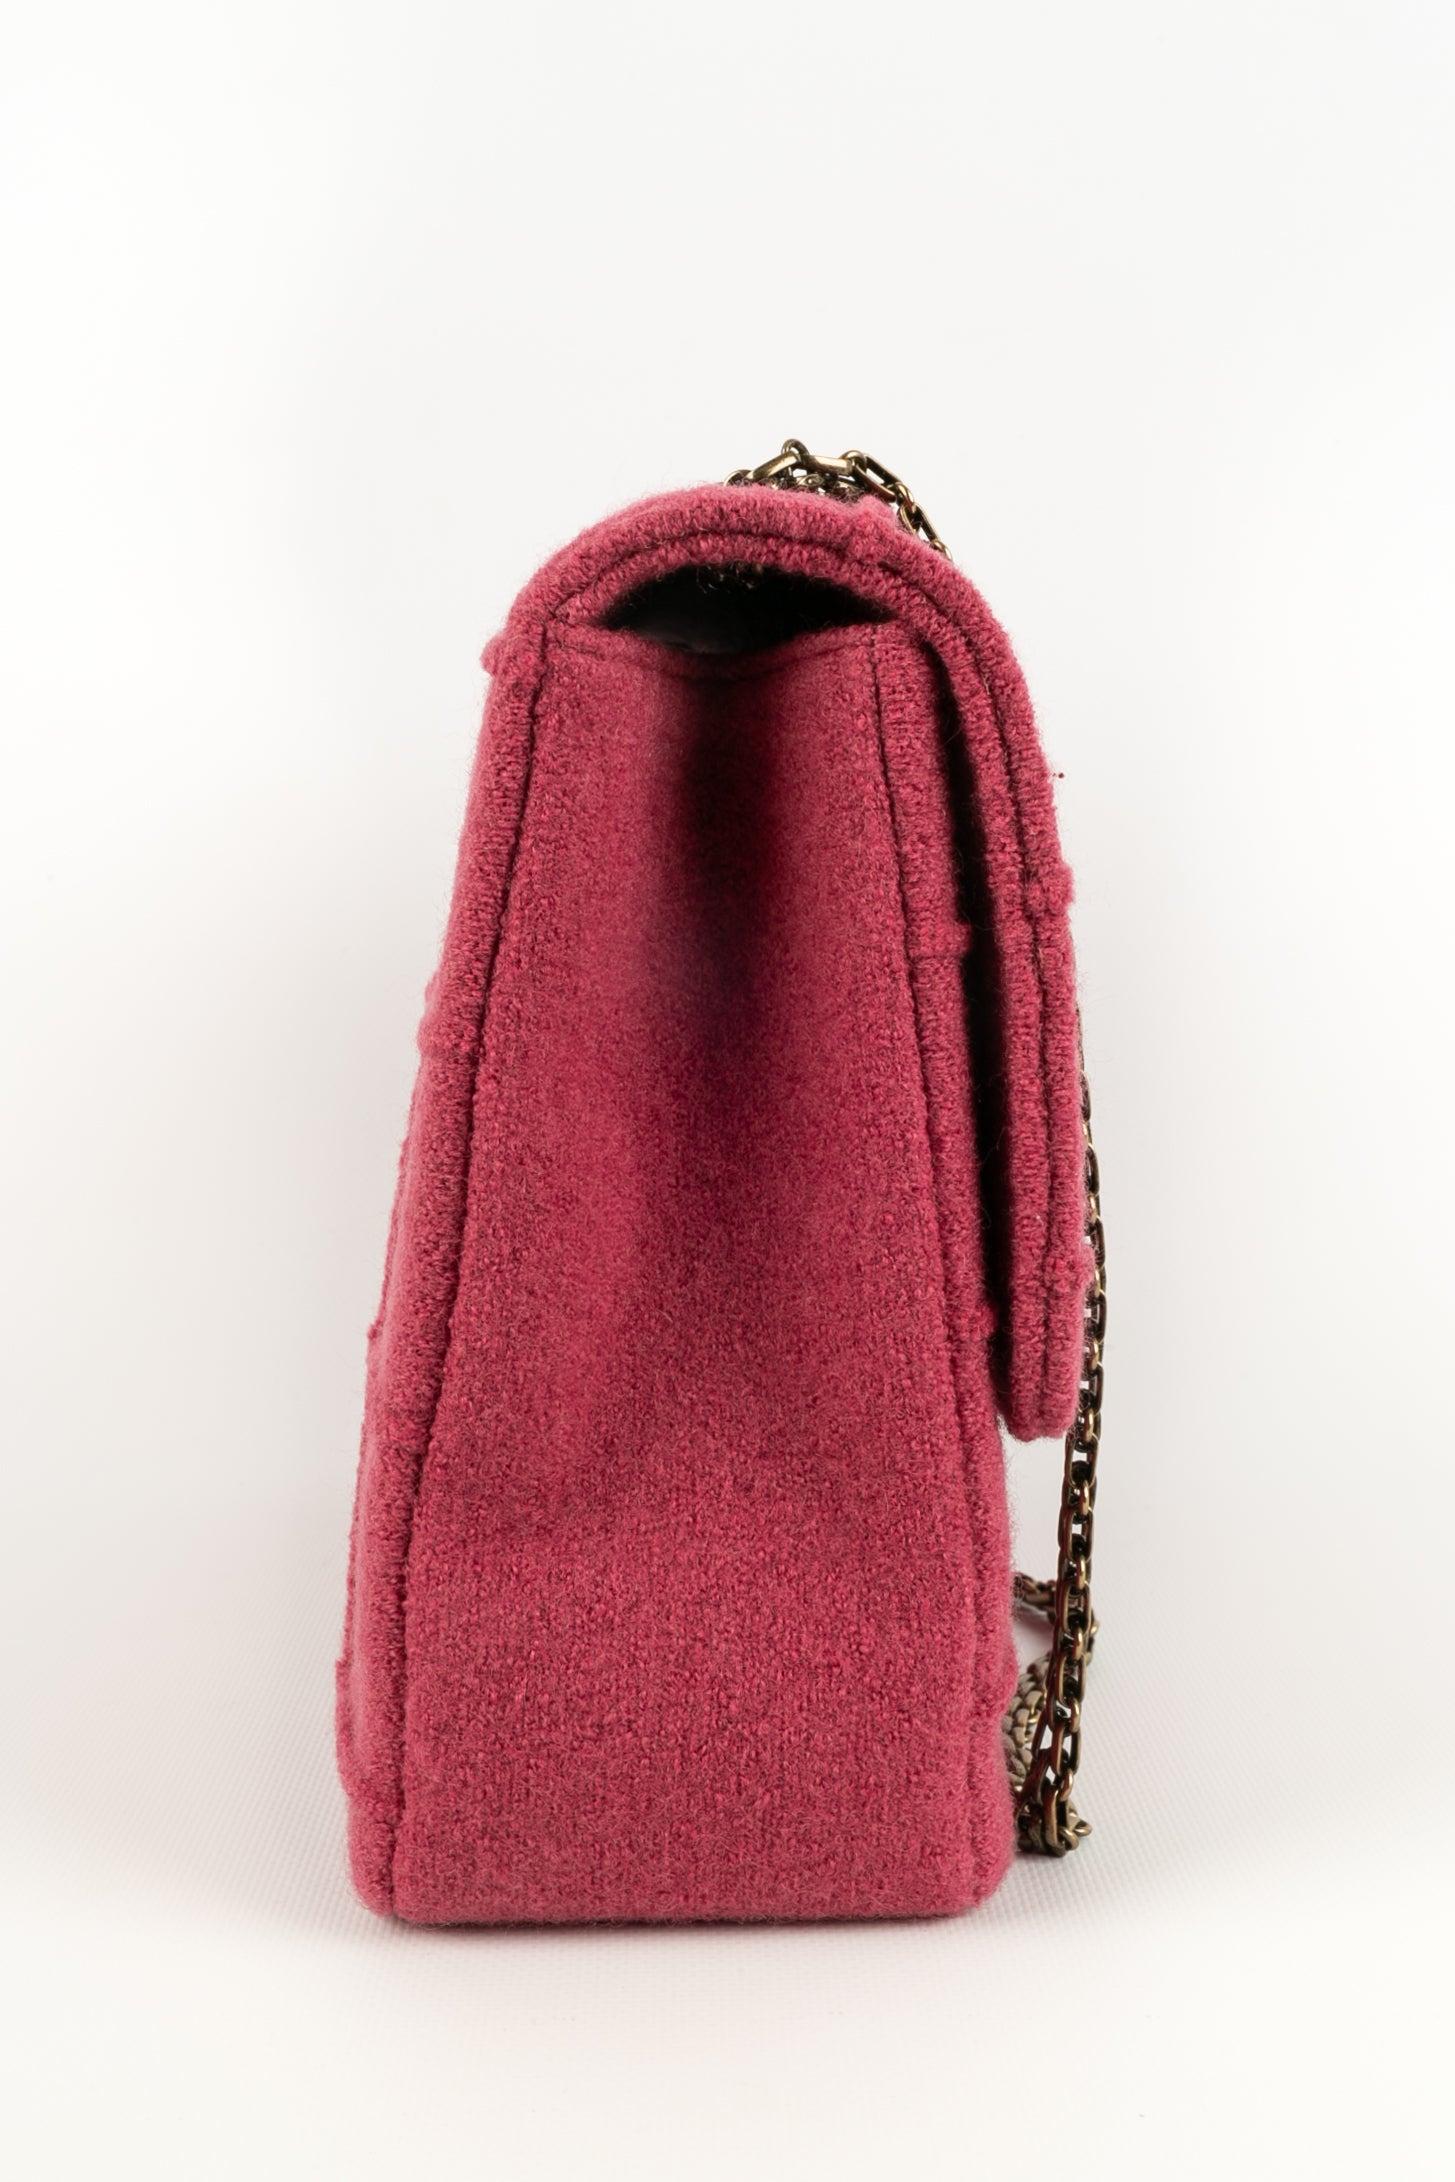 Women's Chanel 2.55 Pink Wool Bag Collection, 1997/99 For Sale